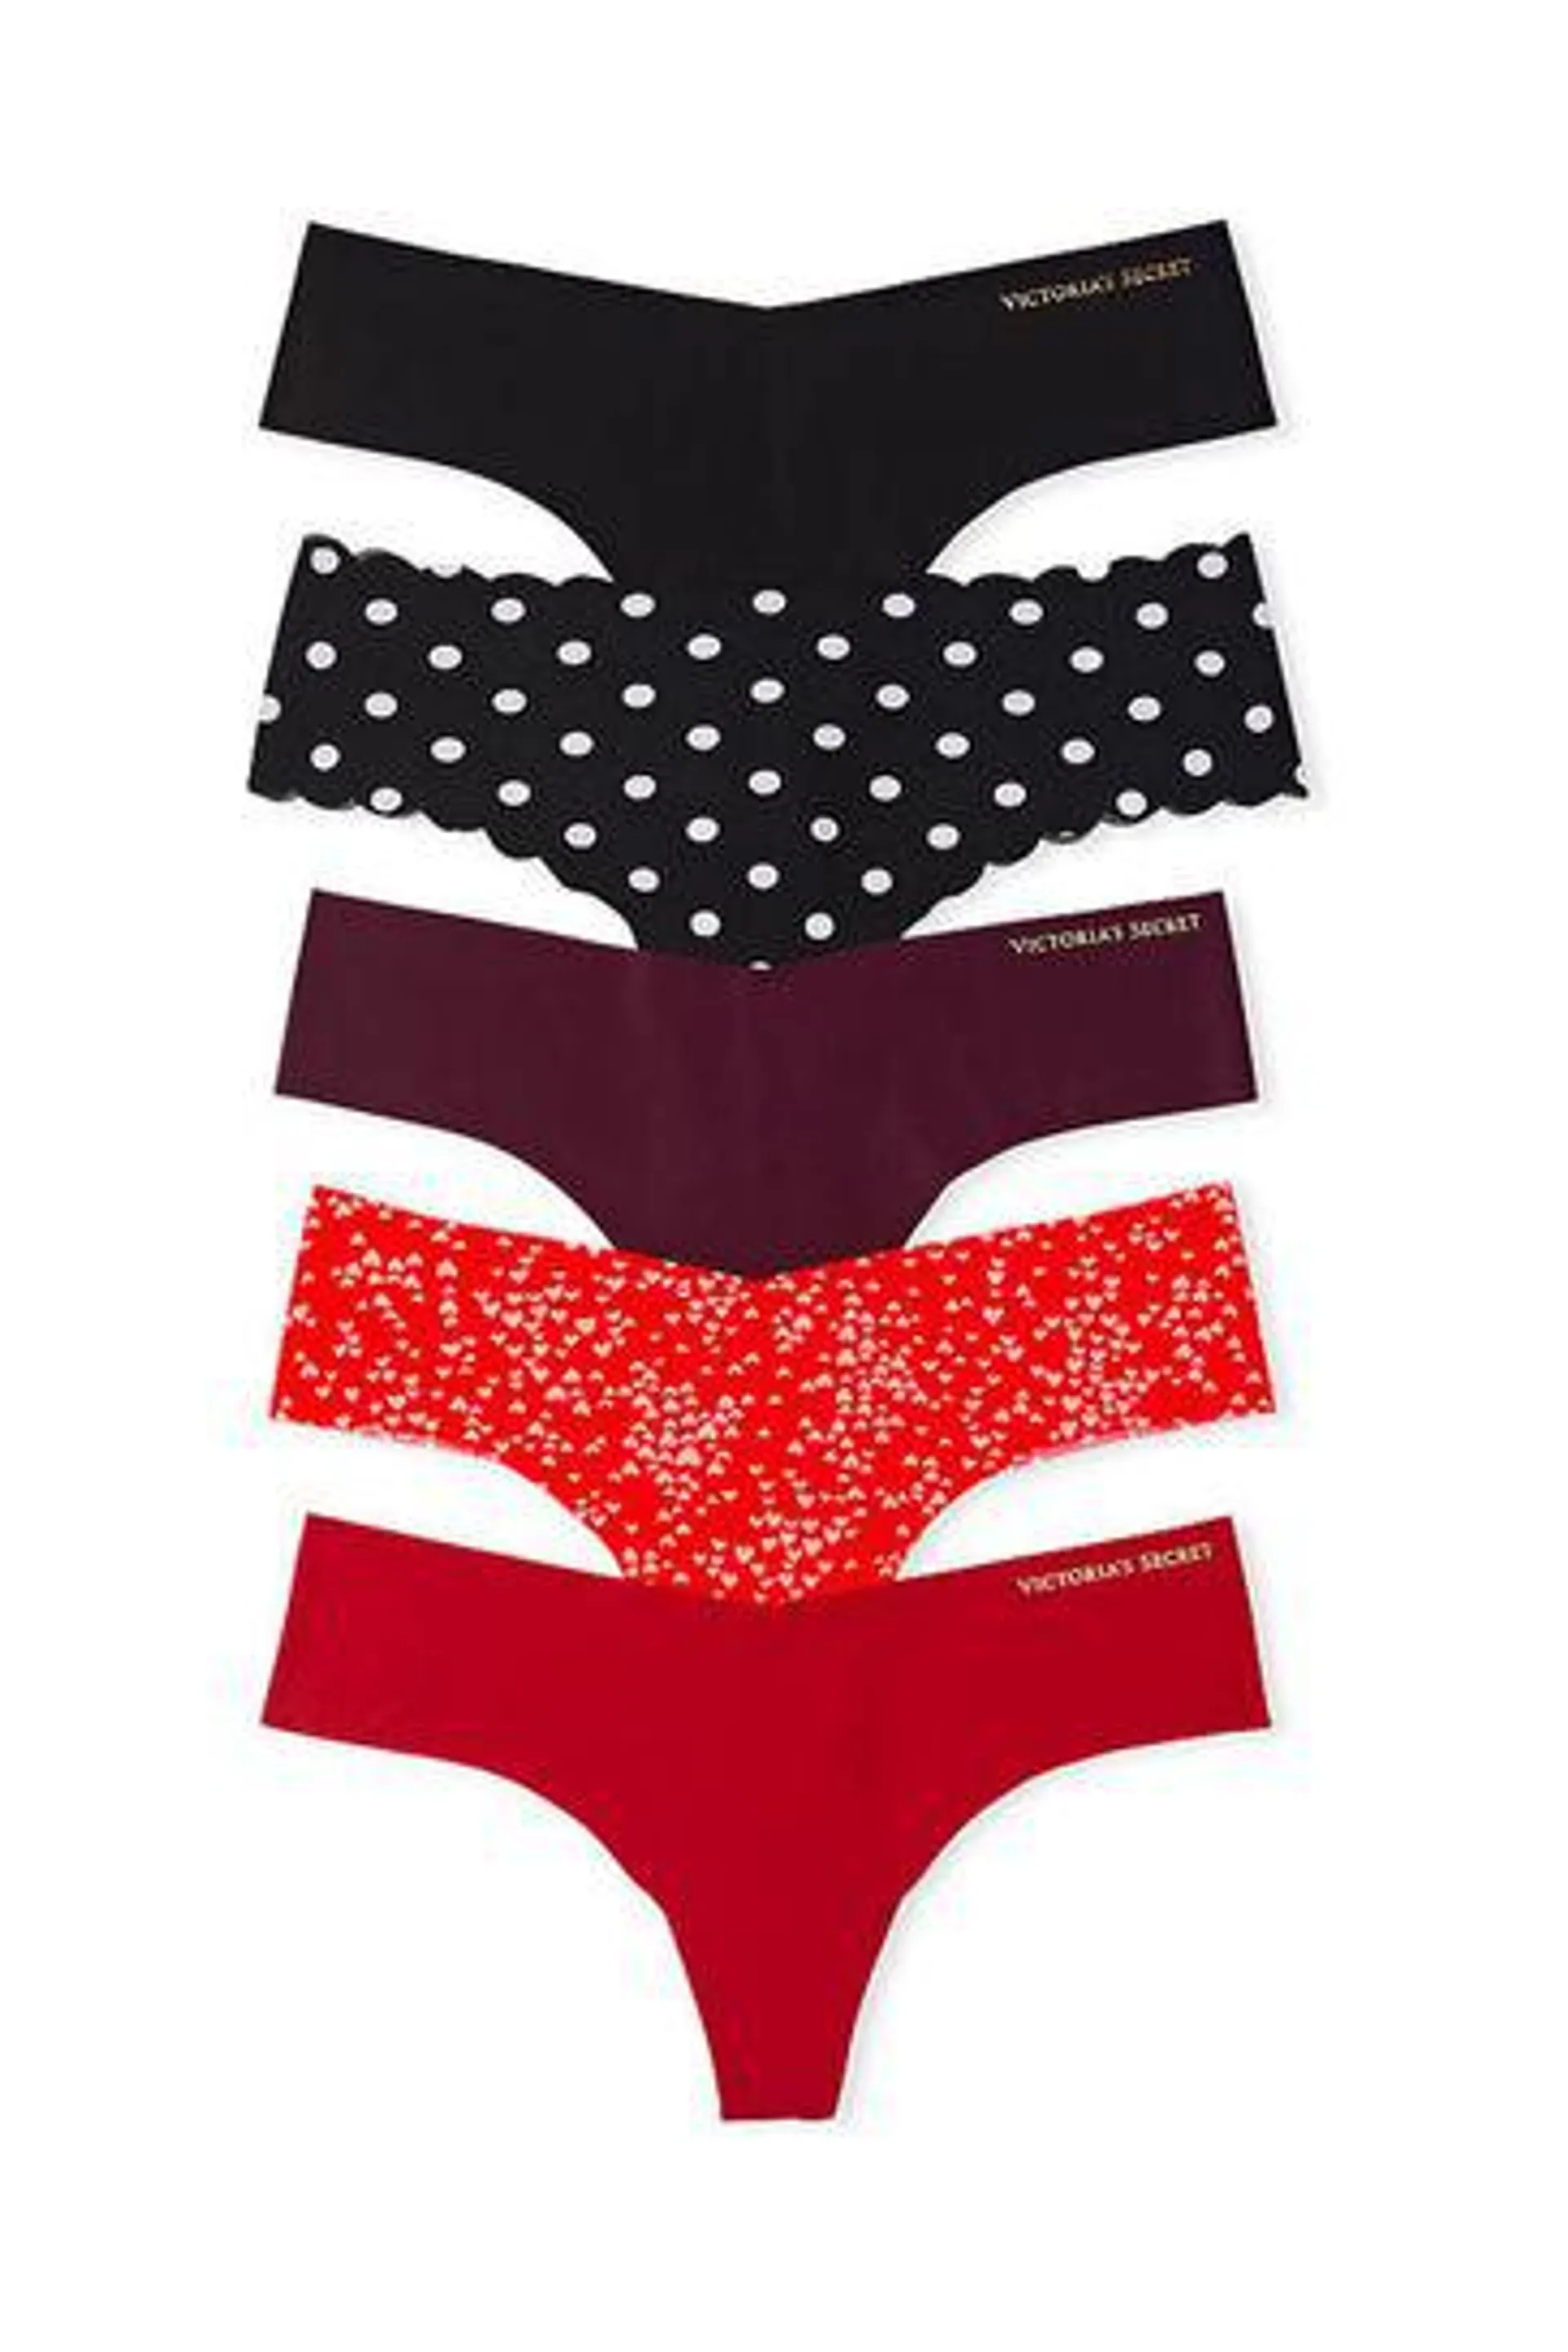 Sexy Illusions by Victorias Secret No Show Thong Knickers 5 Pack